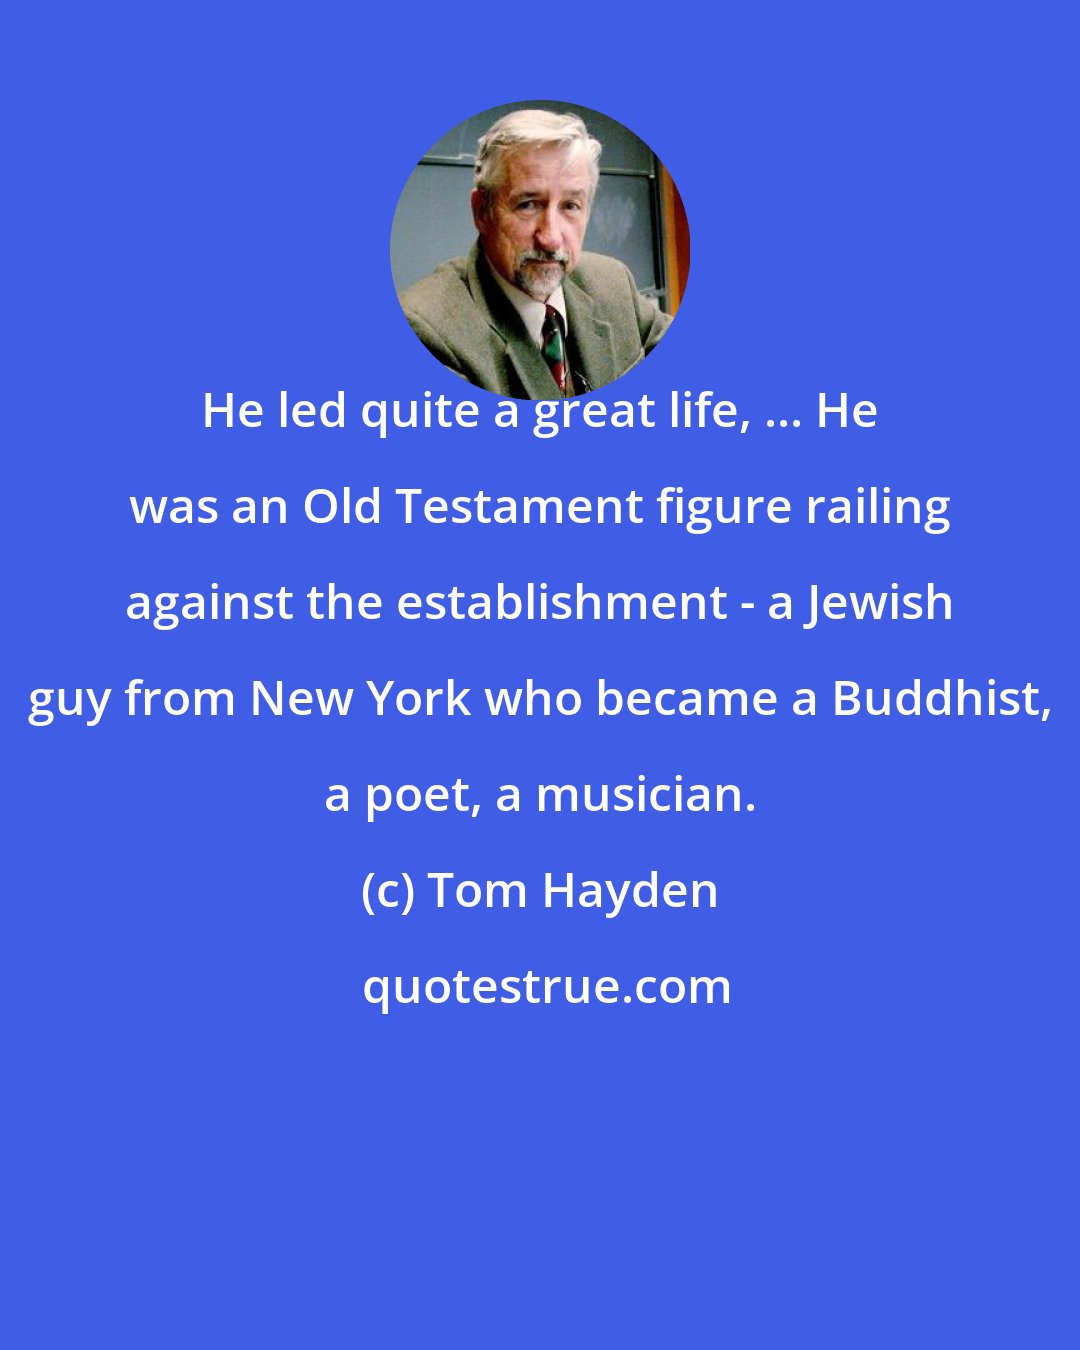 Tom Hayden: He led quite a great life, ... He was an Old Testament figure railing against the establishment - a Jewish guy from New York who became a Buddhist, a poet, a musician.